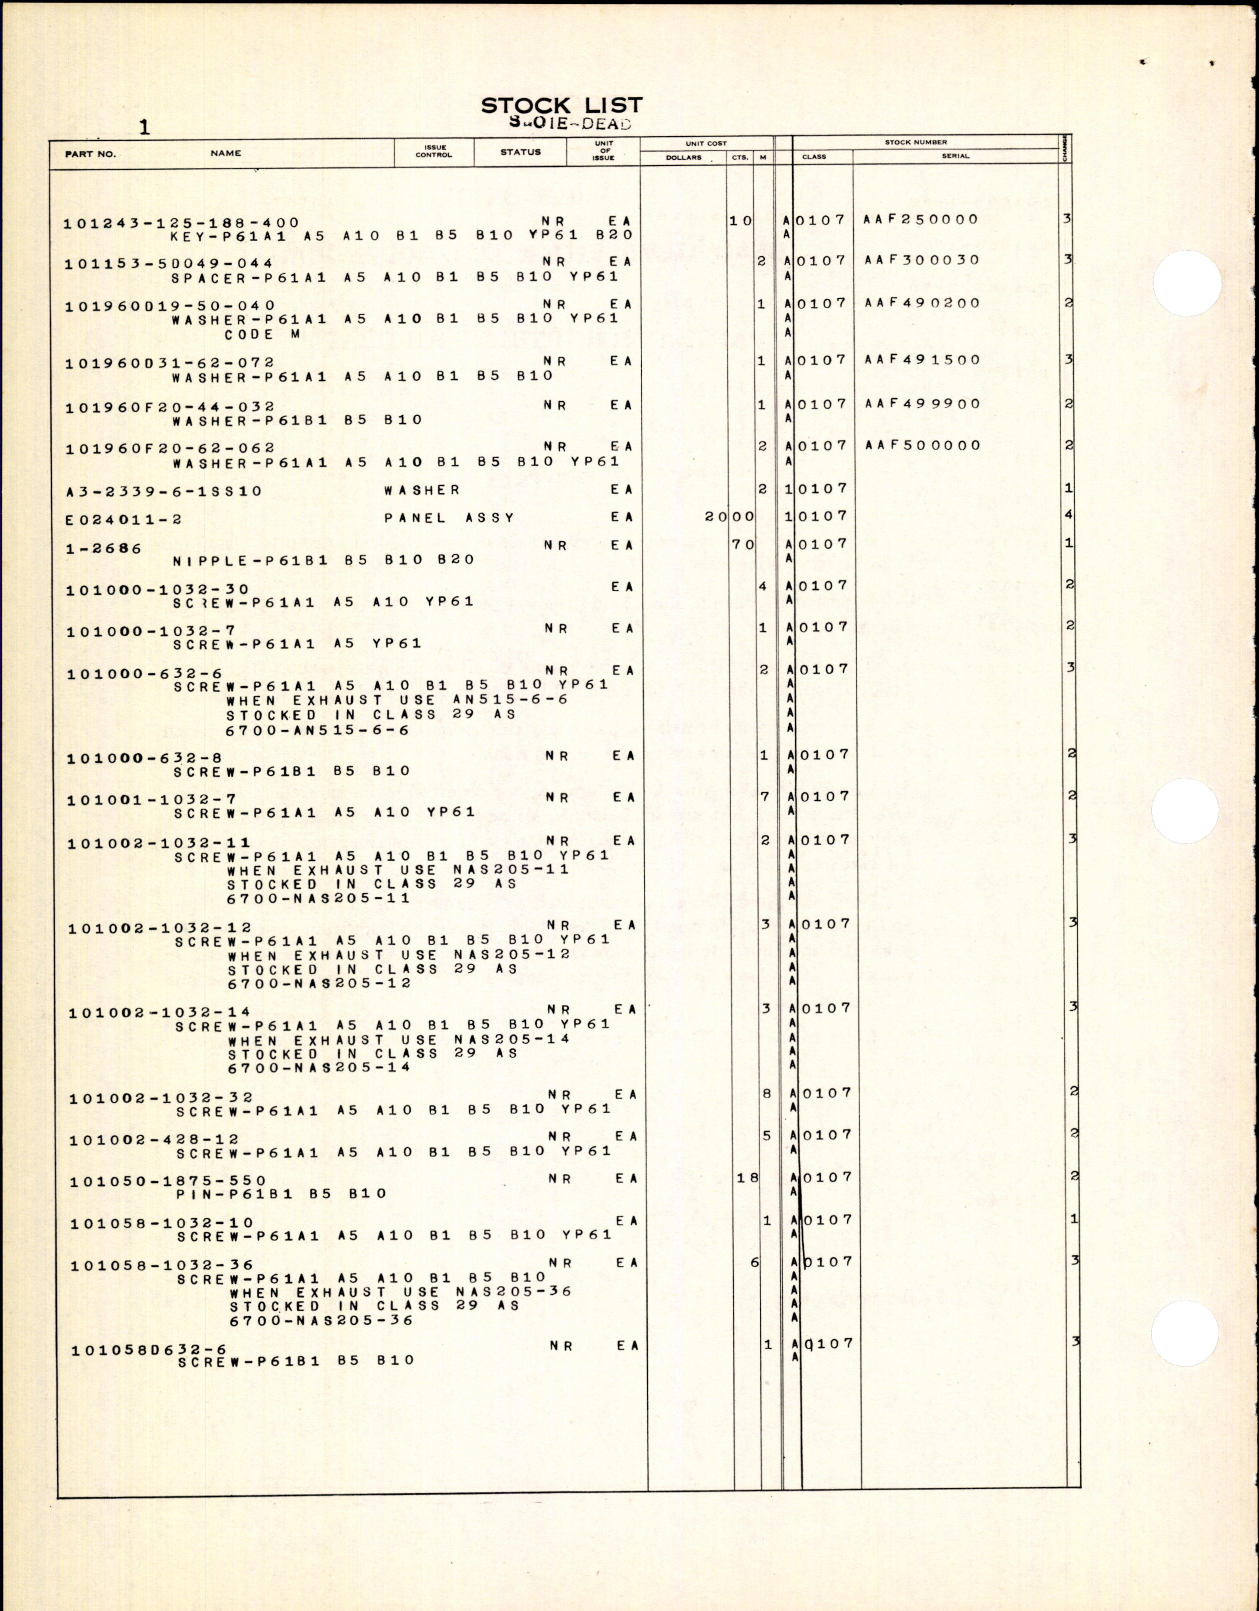 Sample page 4 from AirCorps Library document: Dead Items Stock List for Northrop Aircraft